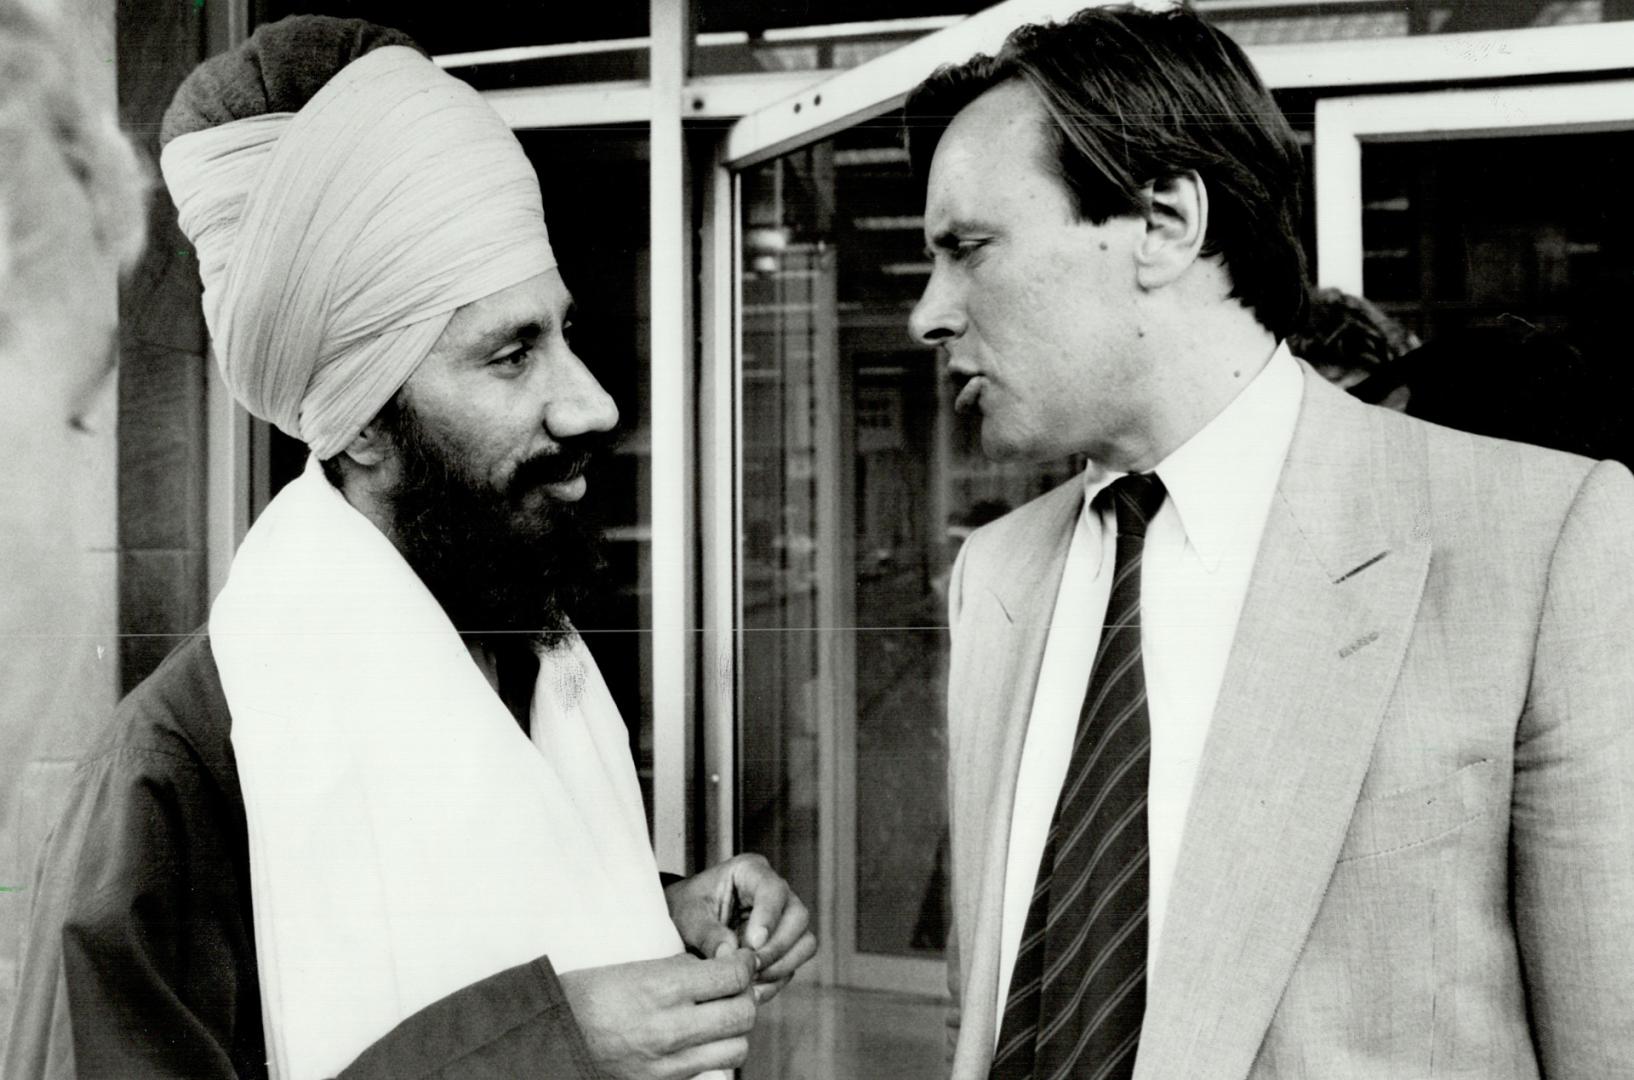 On trial: Daljit Singh Deol, left, and Talwinder Singh Parmar are among six accused